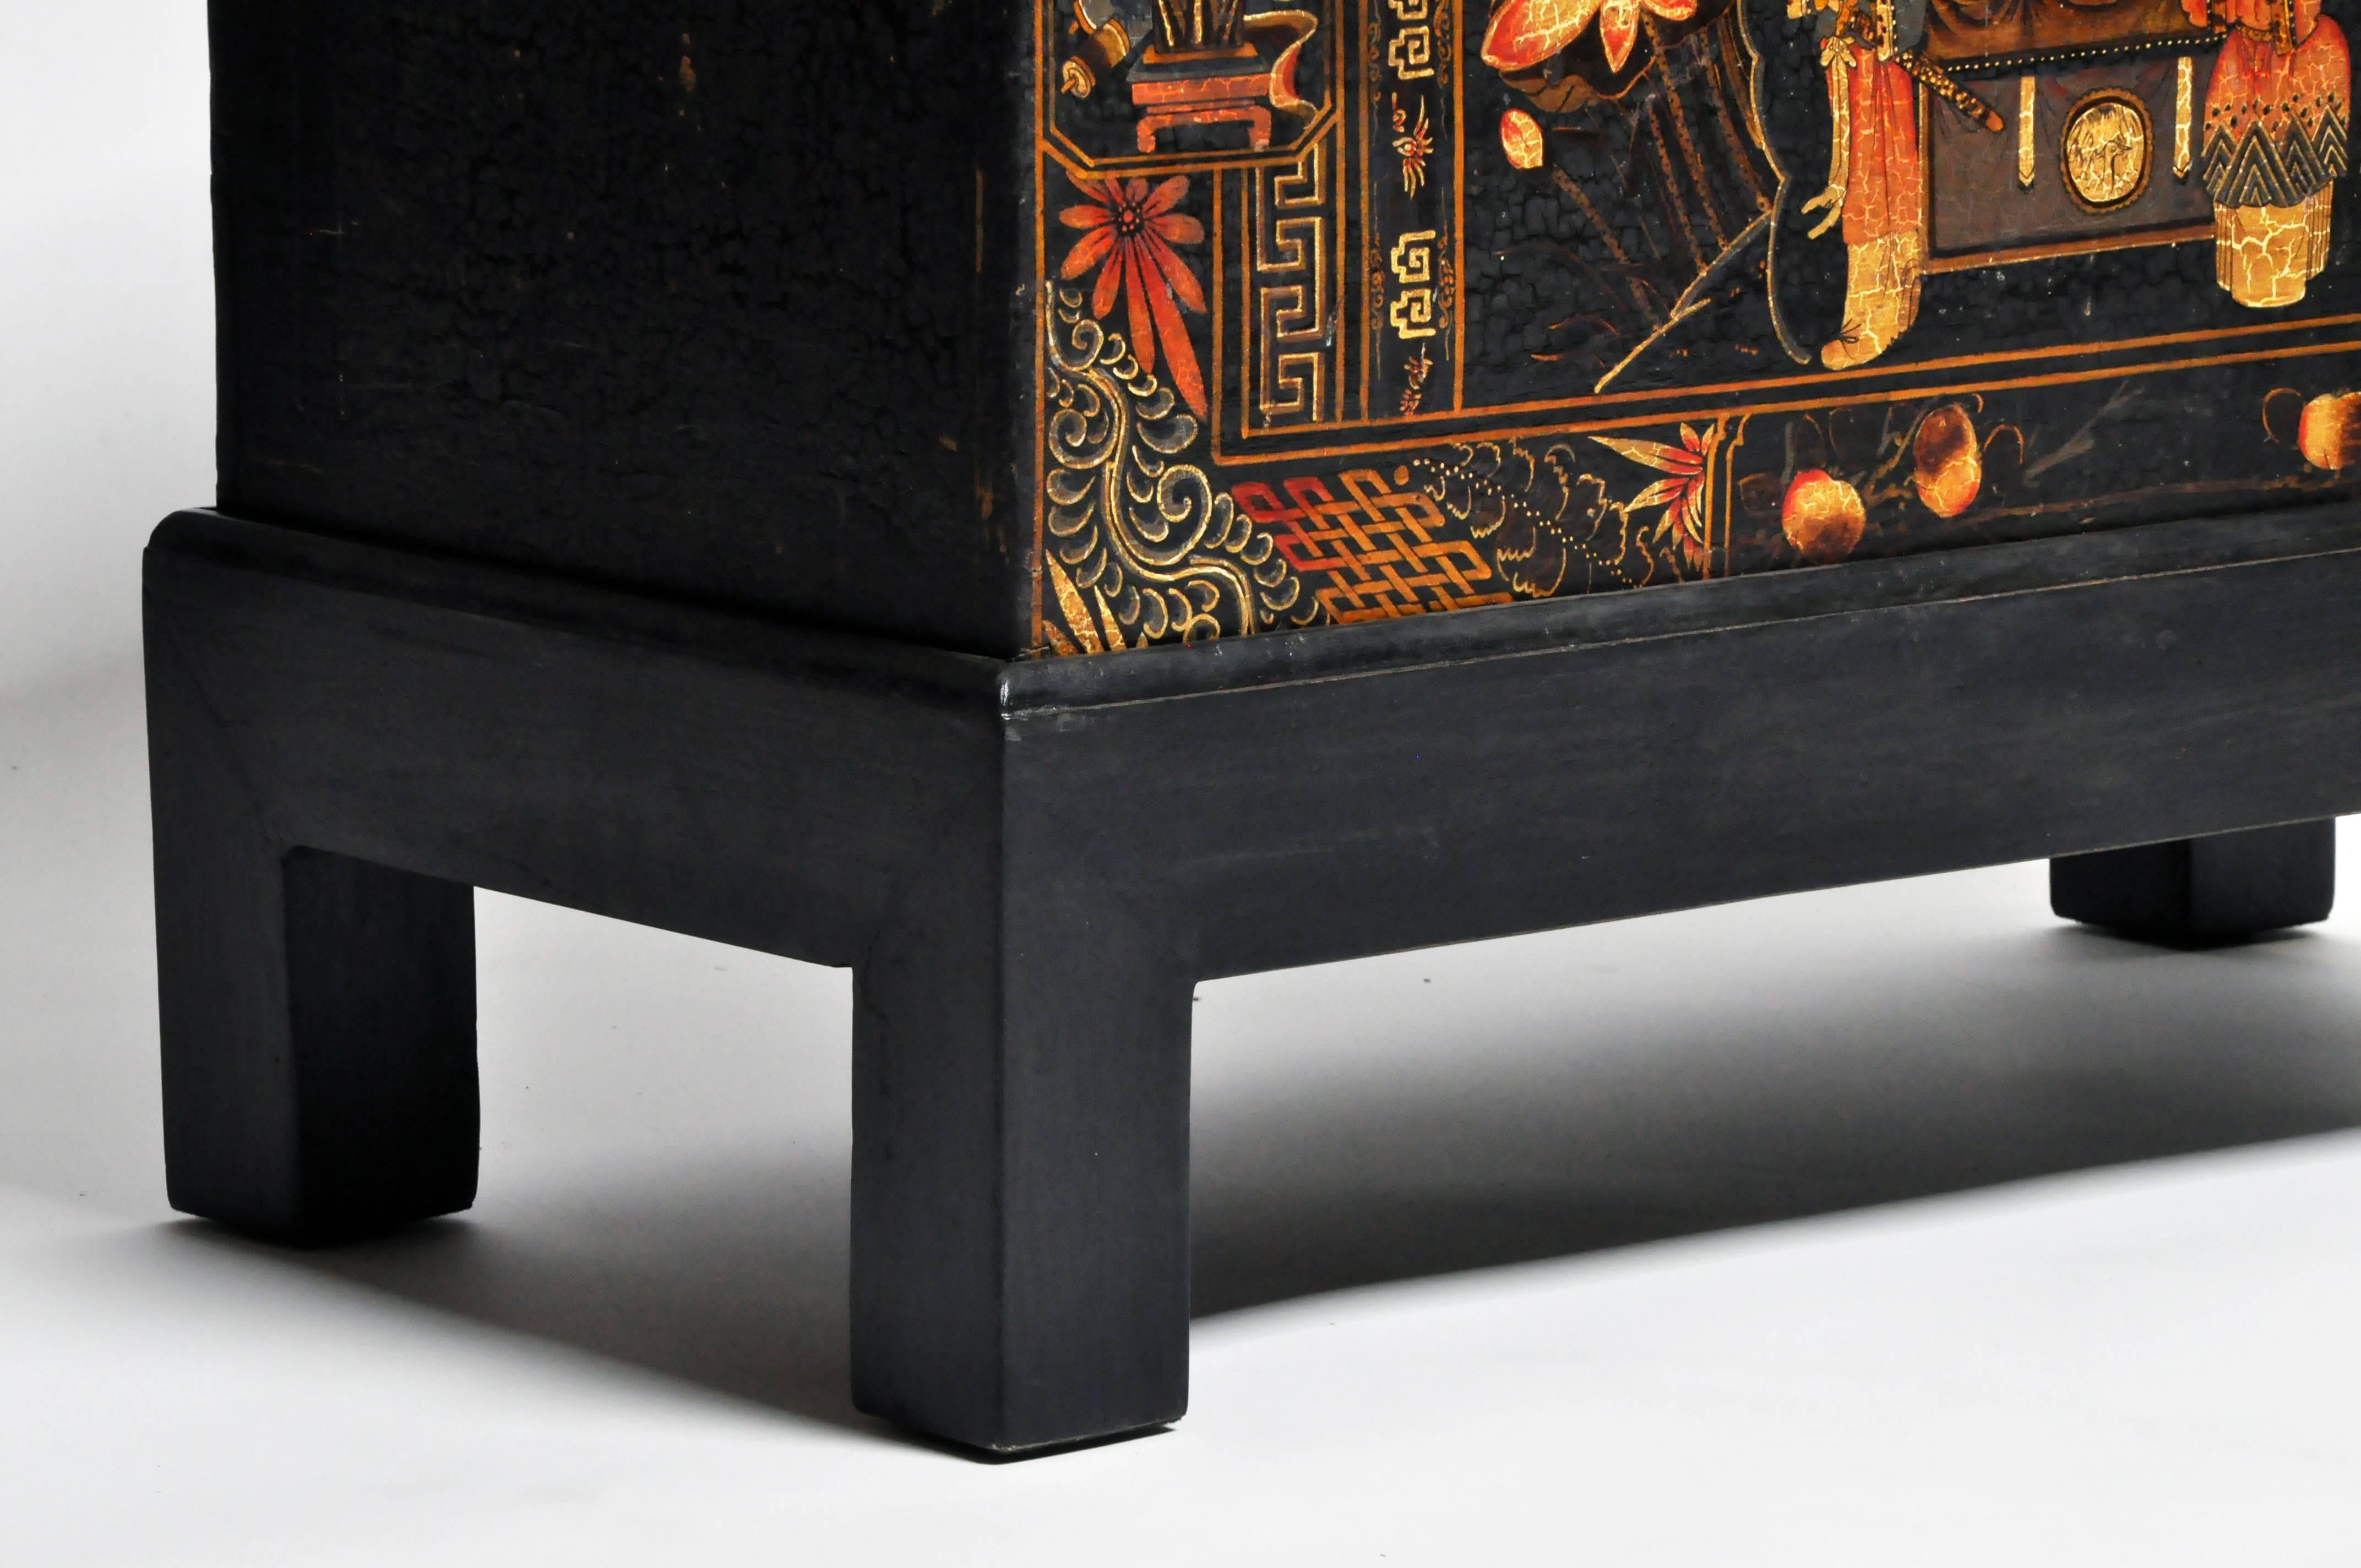 Late Qing Dynasty Storage Chest with Painting on Base 7